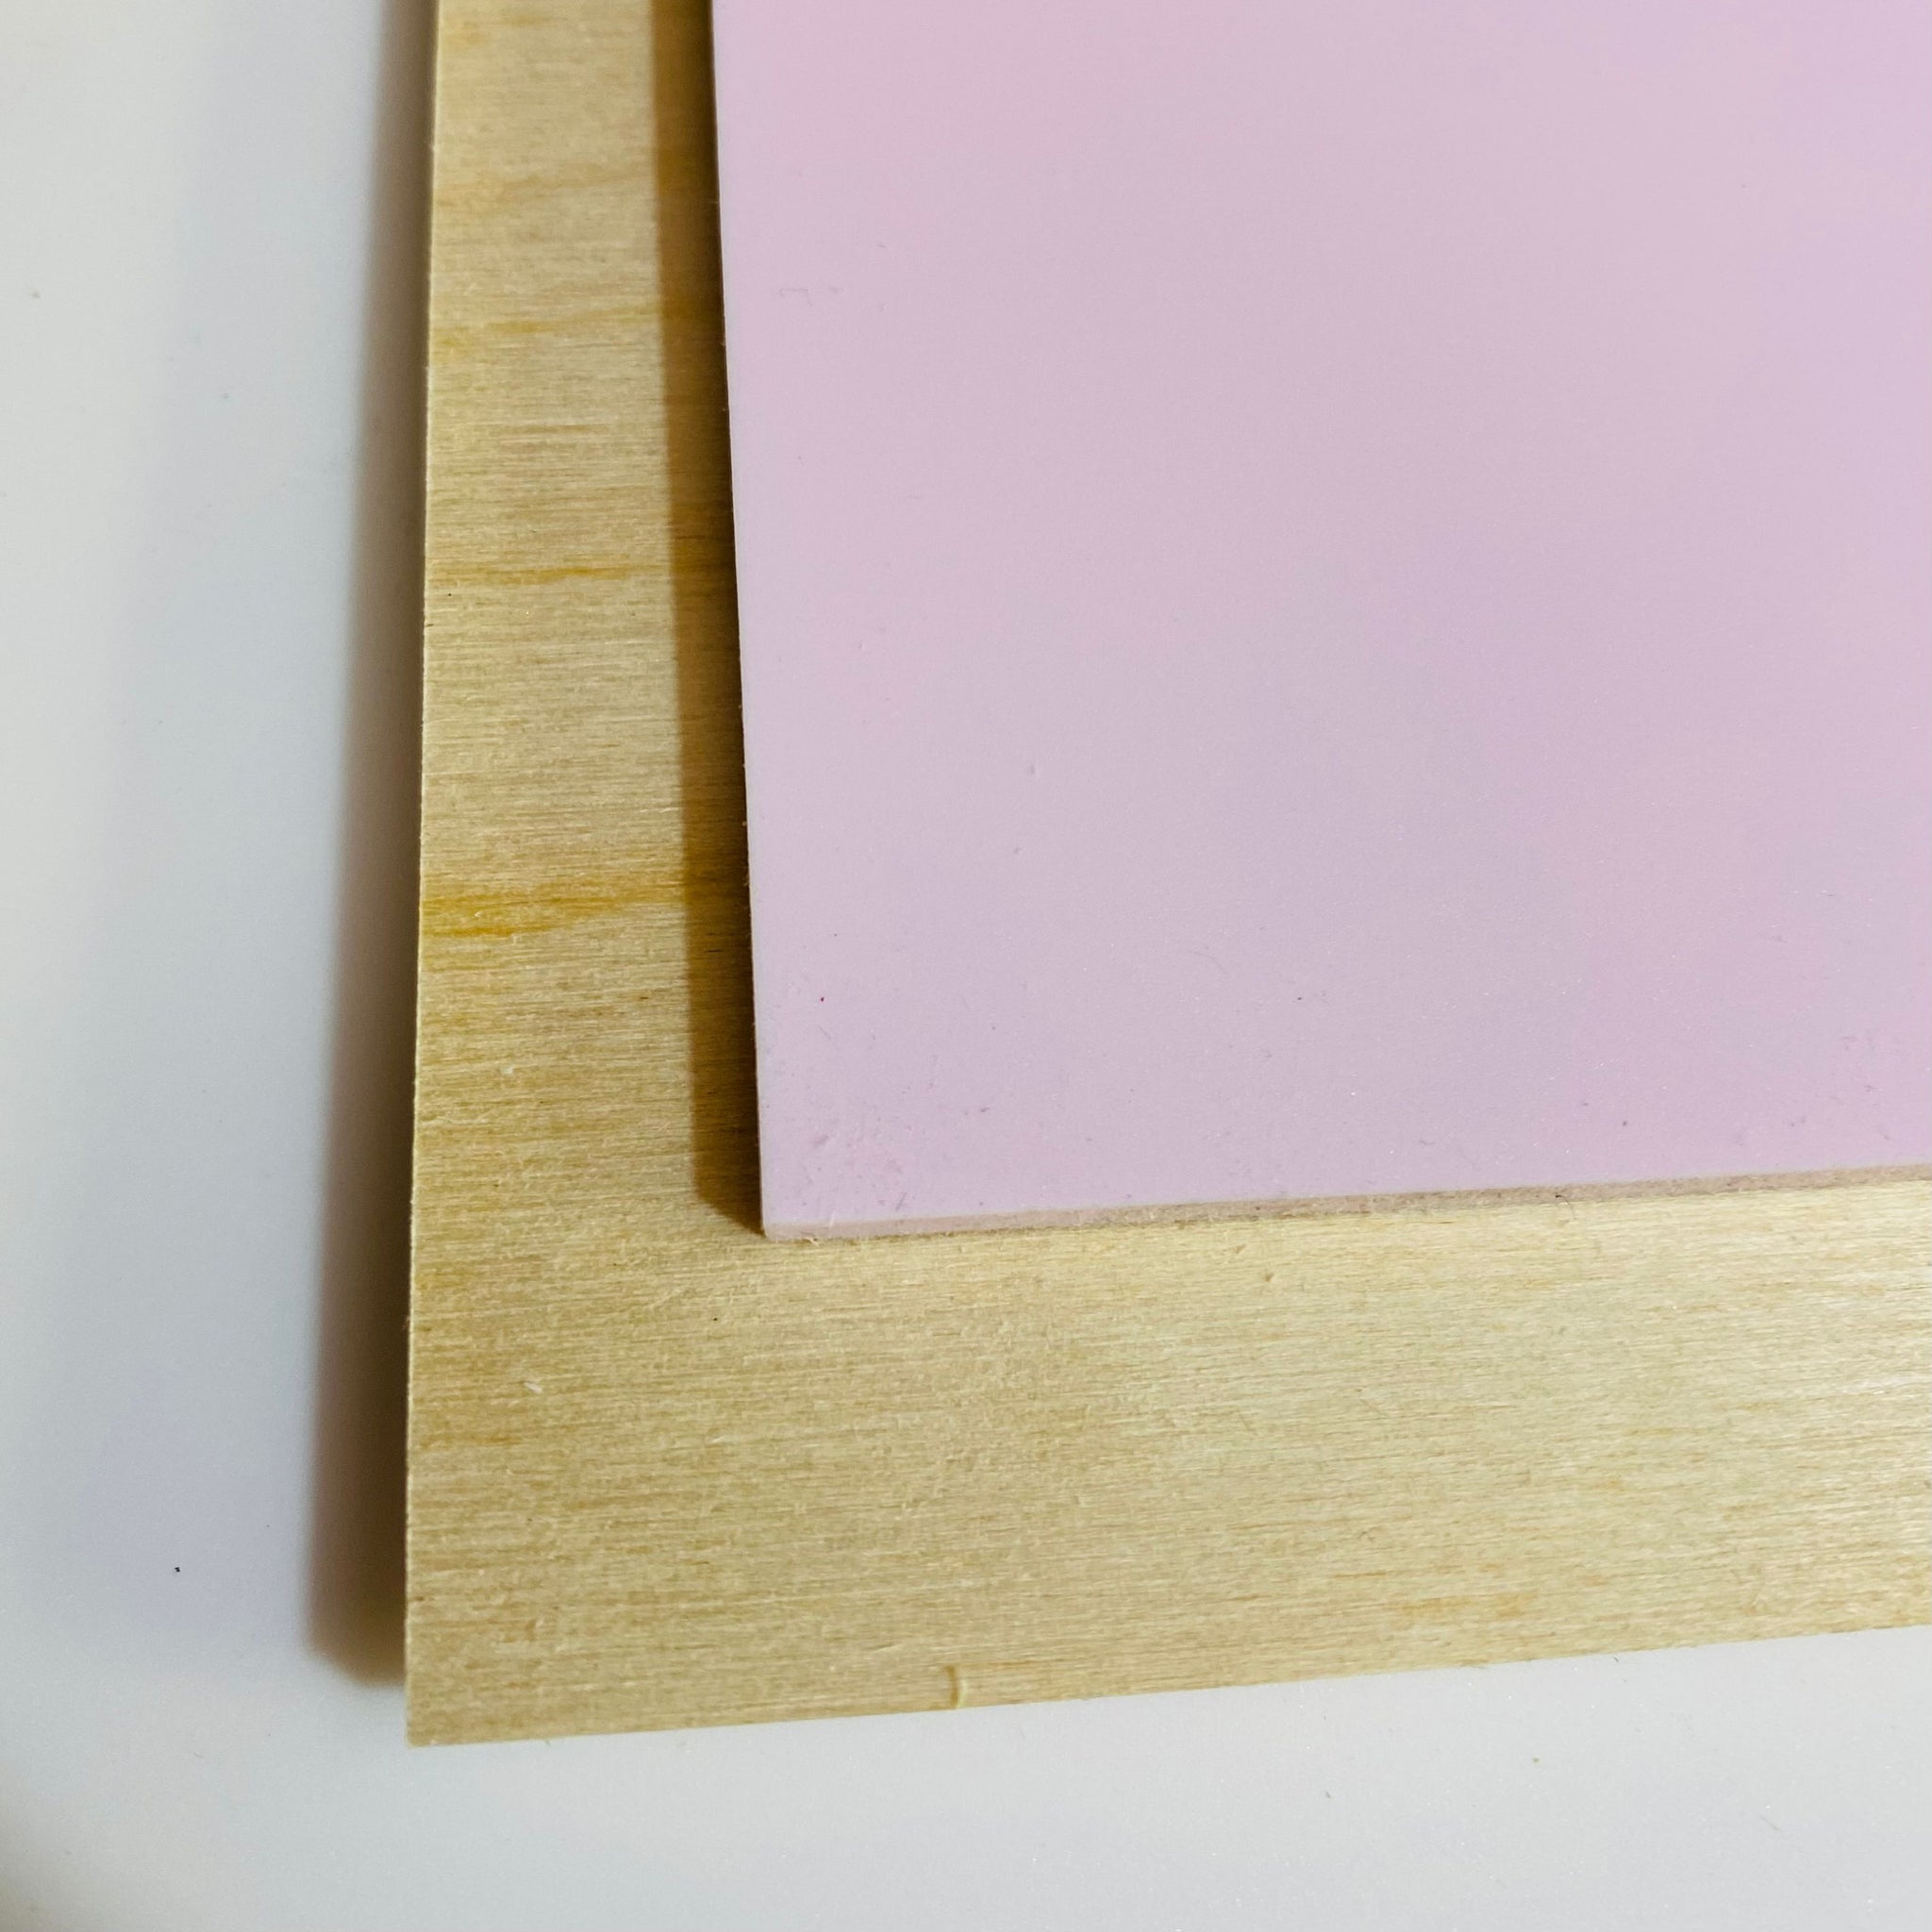 Acrylic Sheets - Cut to Size - Opaque Light Blush Pink - S6067